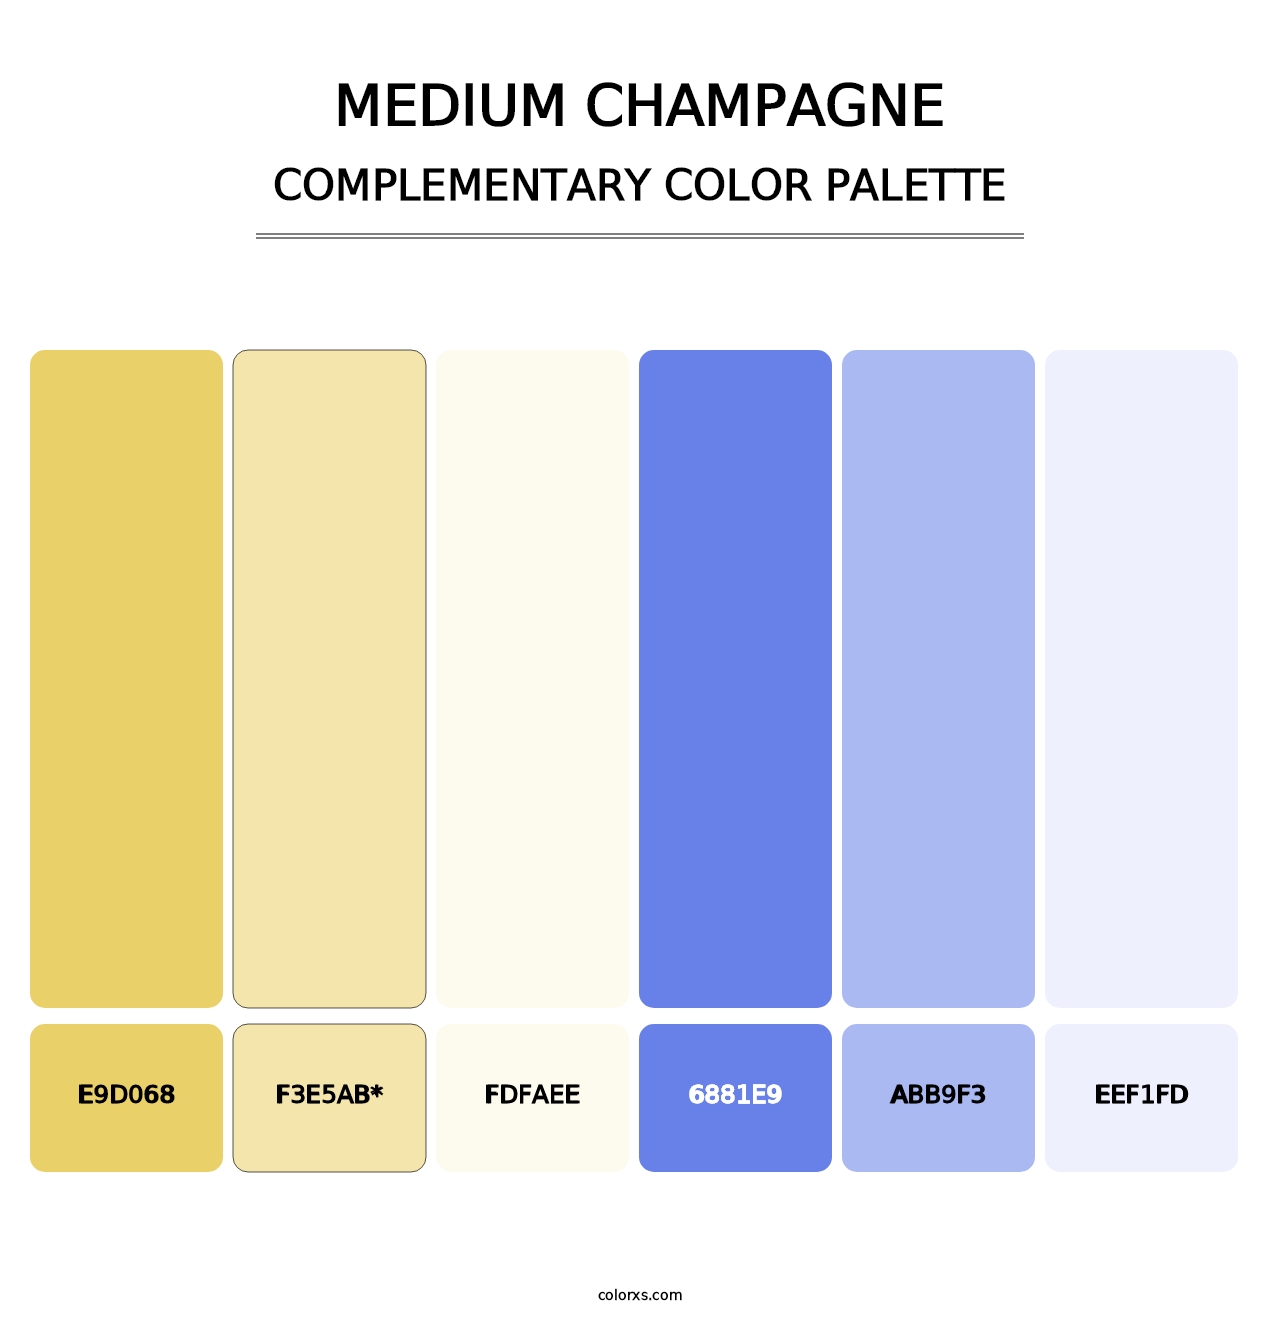 Medium Champagne - Complementary Color Palette